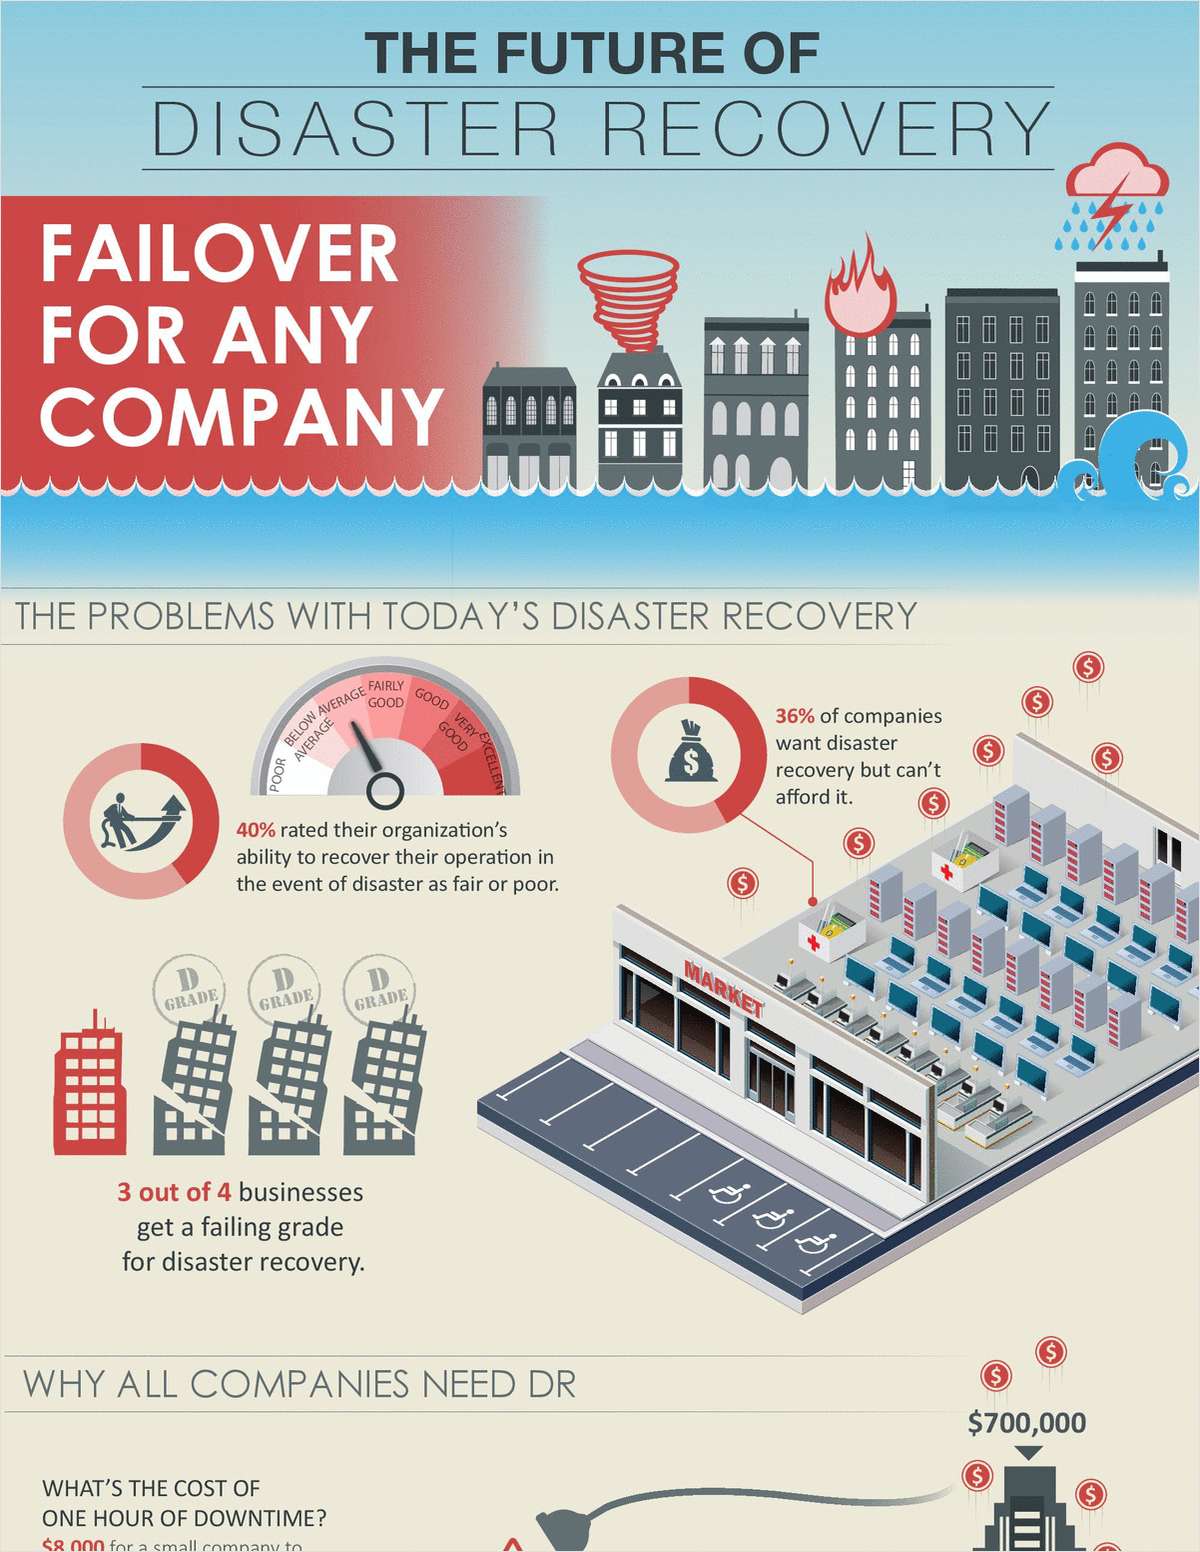 The Future of Disaster Recovery